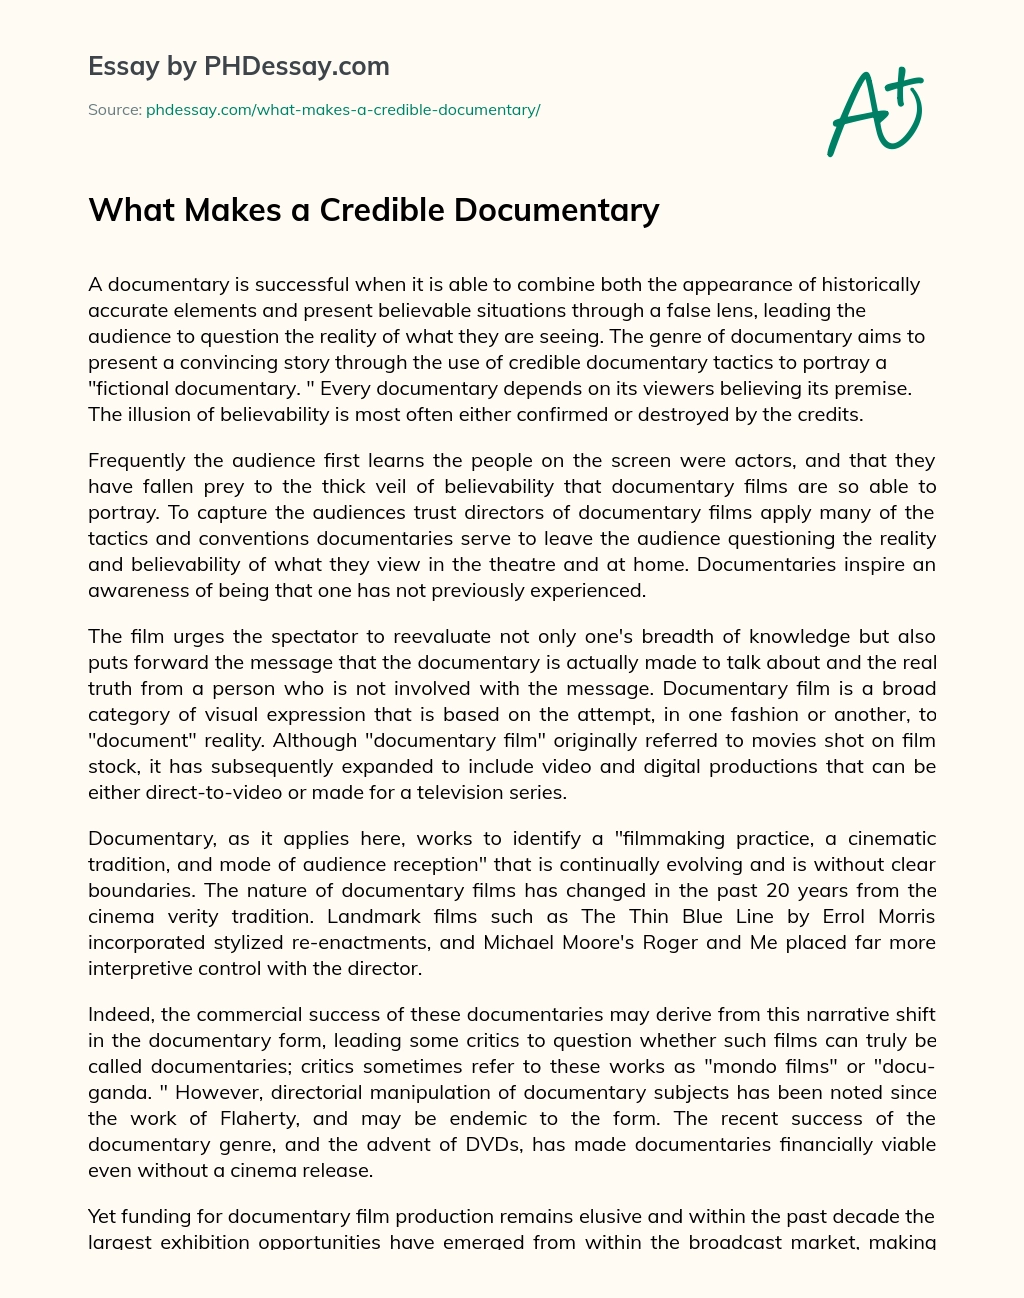 What Makes a Credible Documentary essay